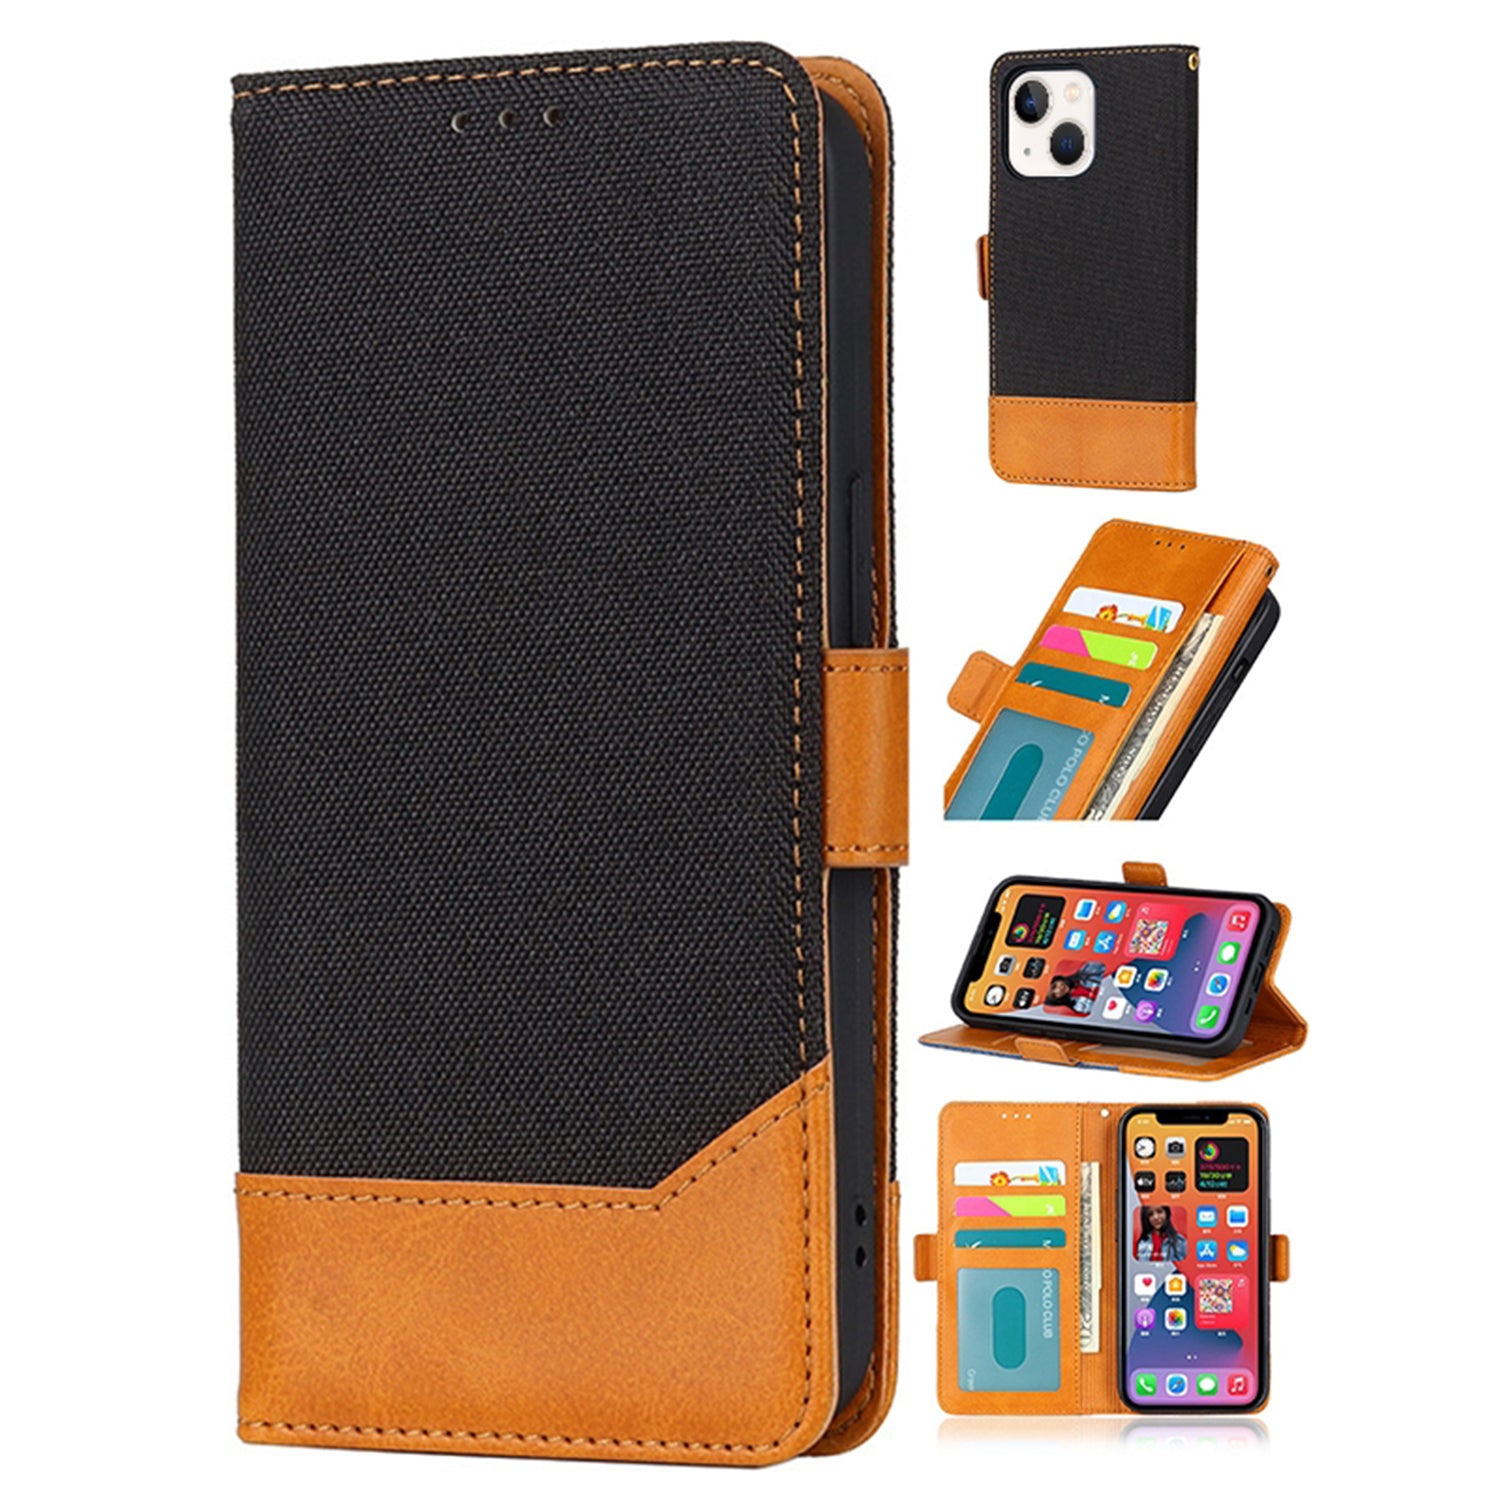 2 in 1 Canvas stitched side buckle leather case for iPhone 13 mini